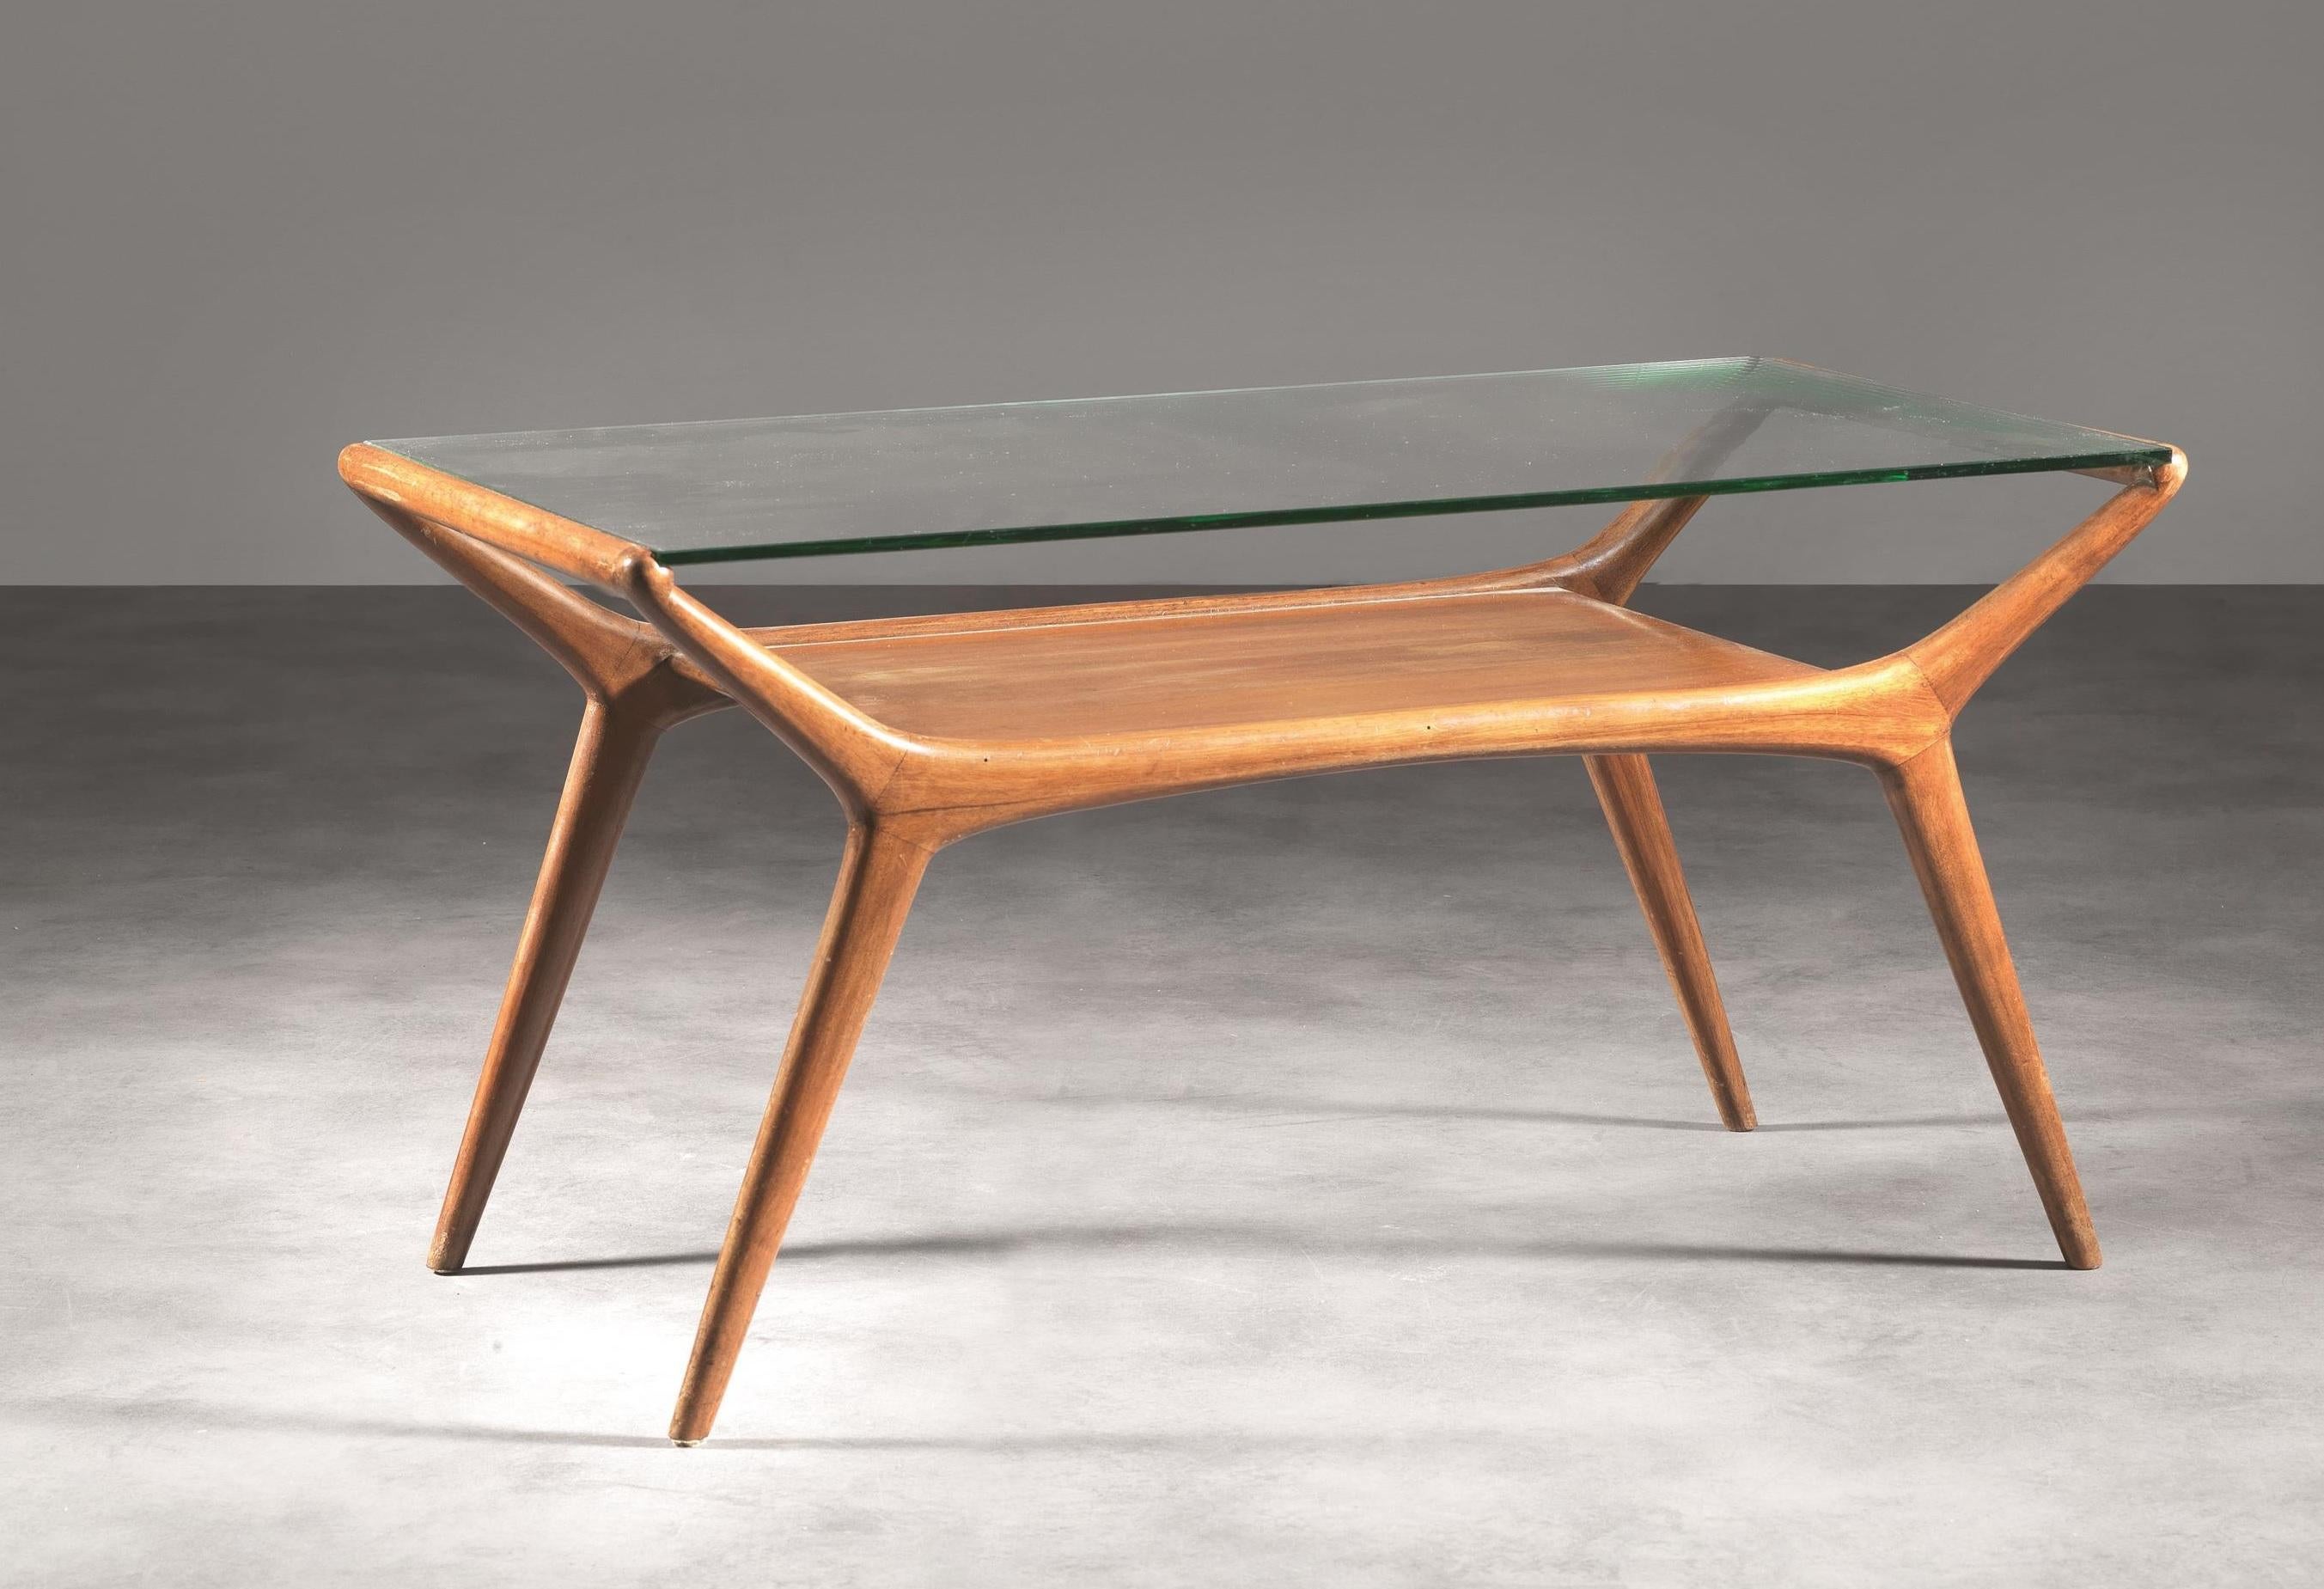 Small coffee table with a wooden structure and a glass shelf designed by Ico Parisi, Italian Manufacture, 1950 circa.
 